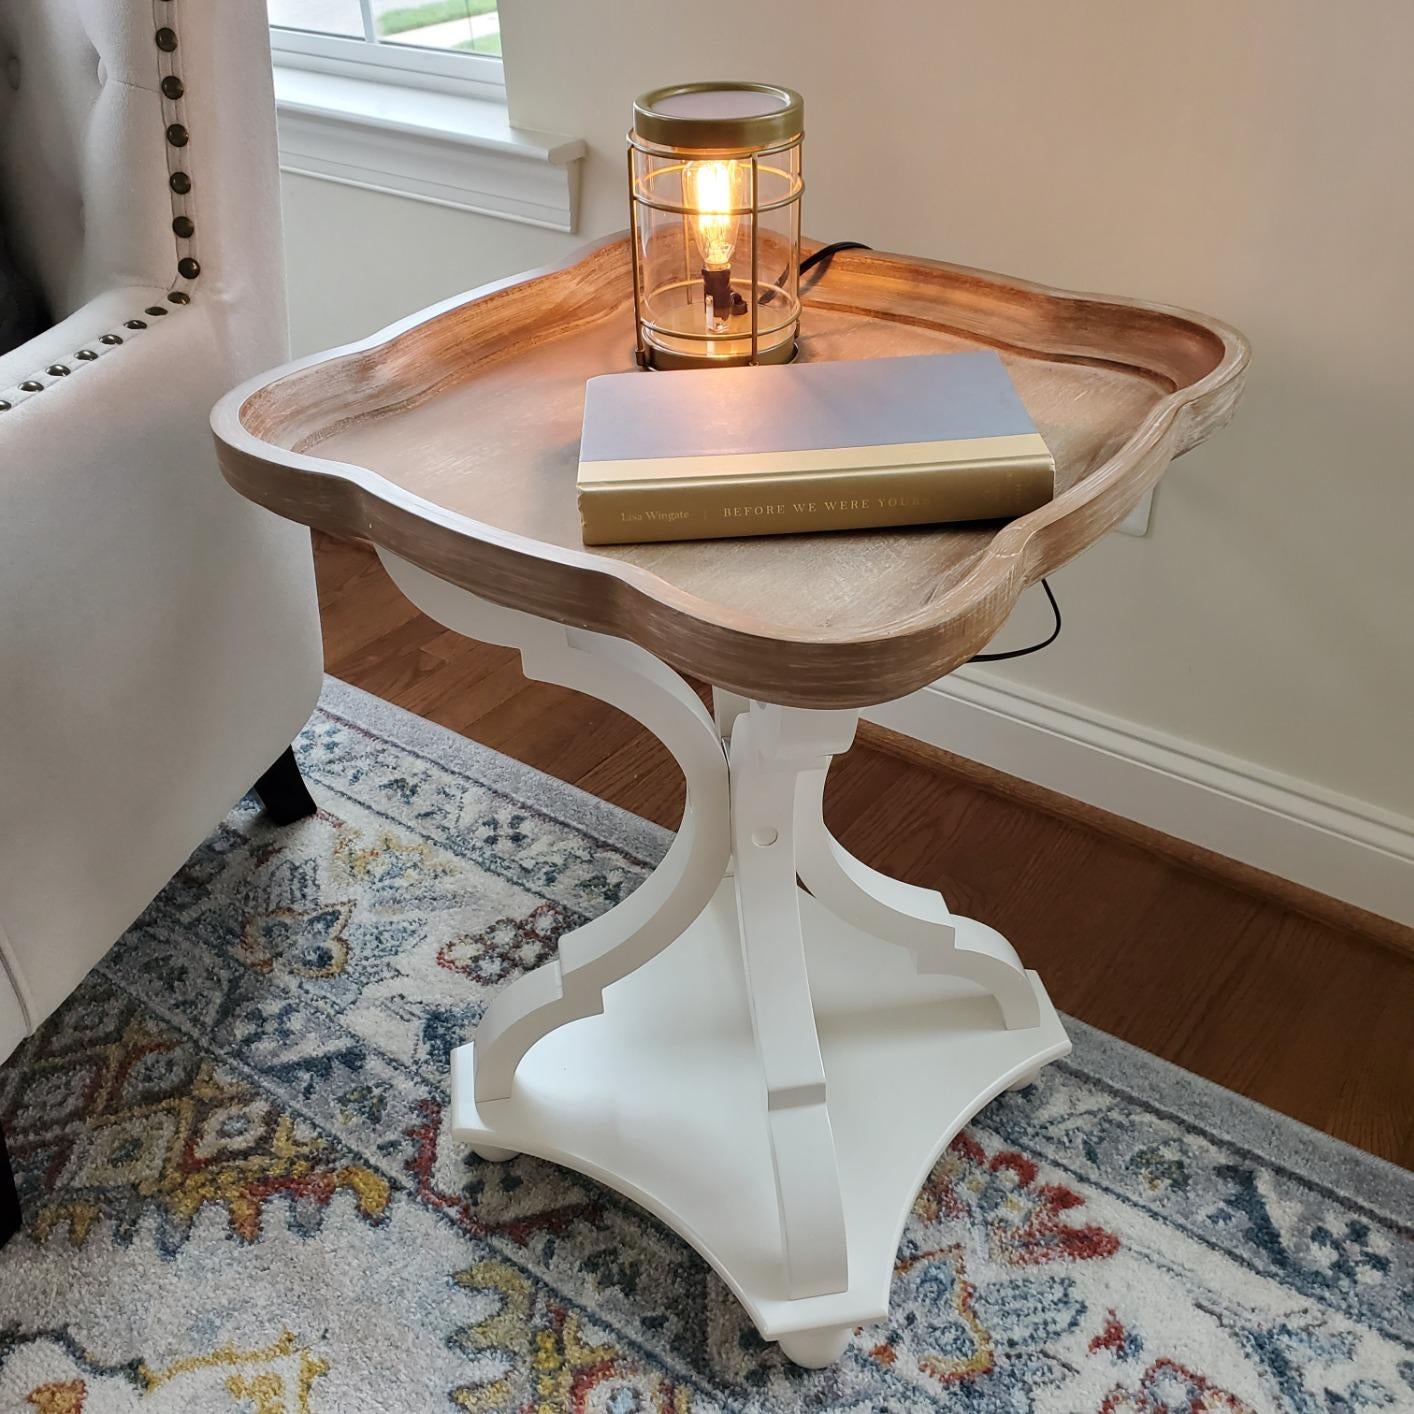 reviewer photo of the white and wood table holding a book and lamp